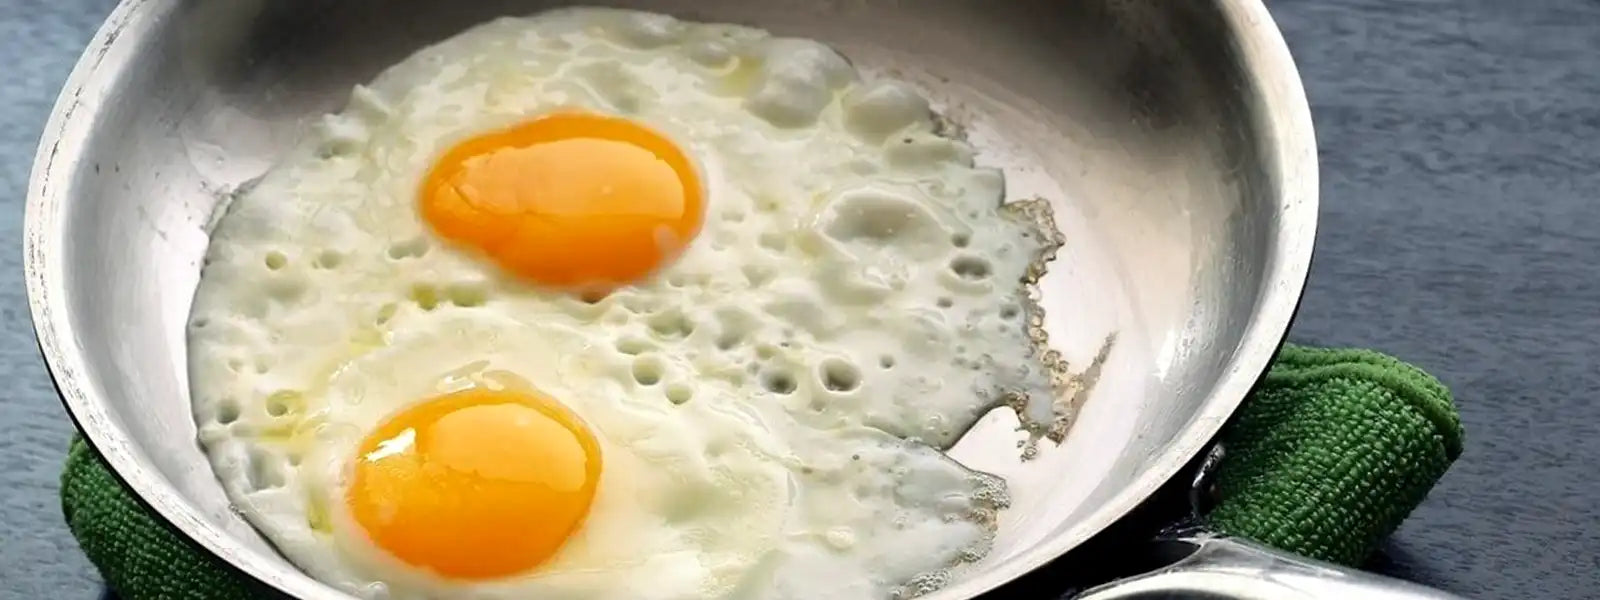 What is the best way to fry an egg in a stainless steel pan?